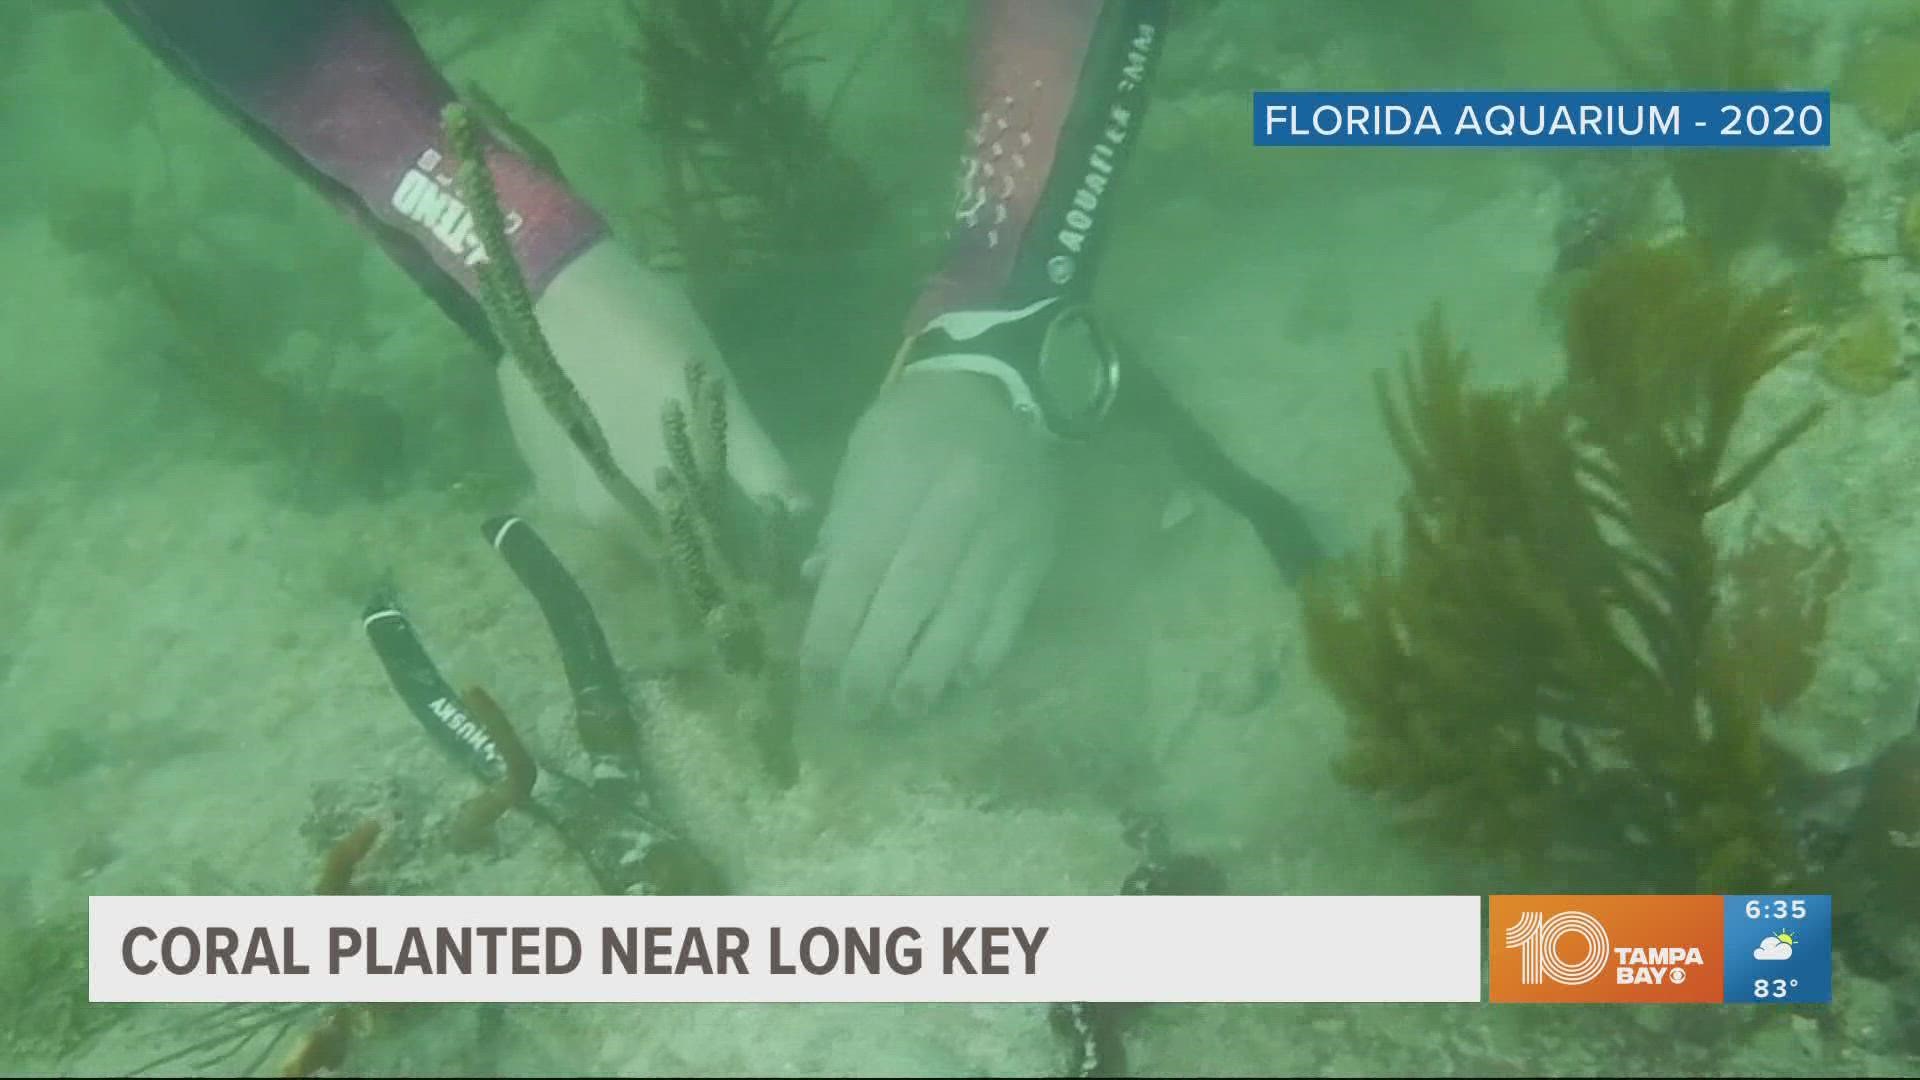 Part of the goal is to support coral restoration efforts in the Florida Keys National Marine Sactuary.